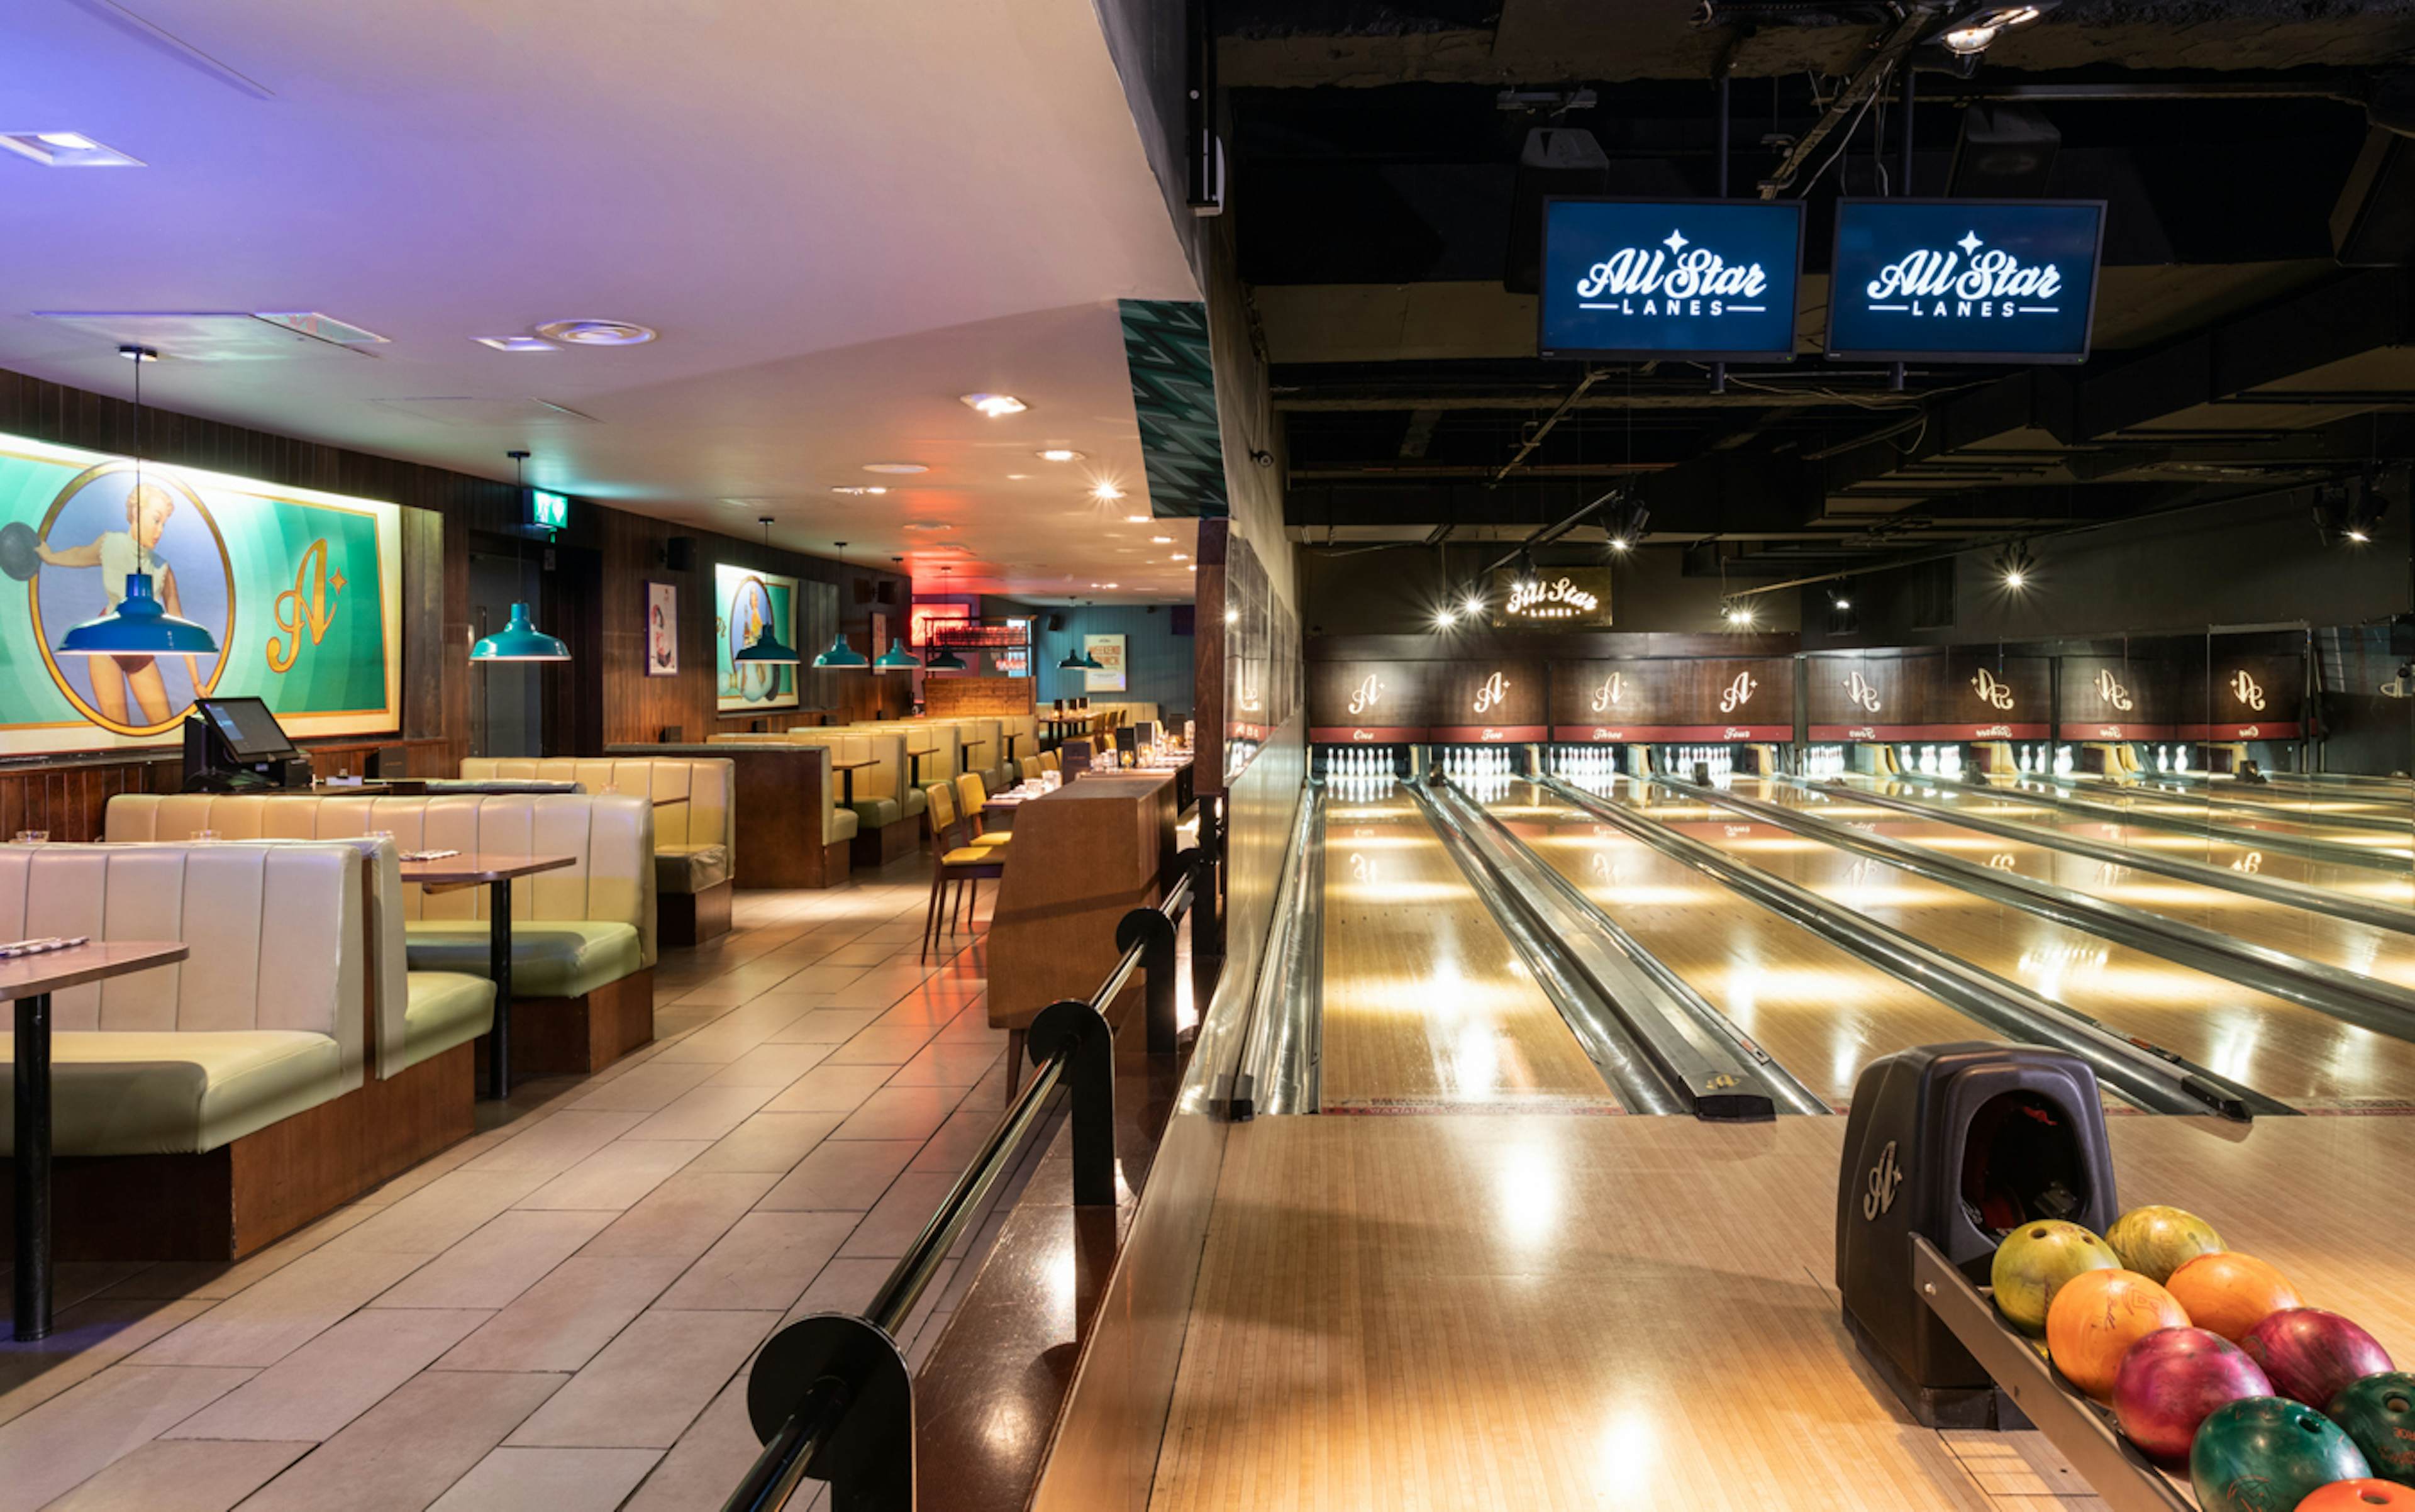 All Star Lanes - Holborn - Main Hall Exclusive image 1